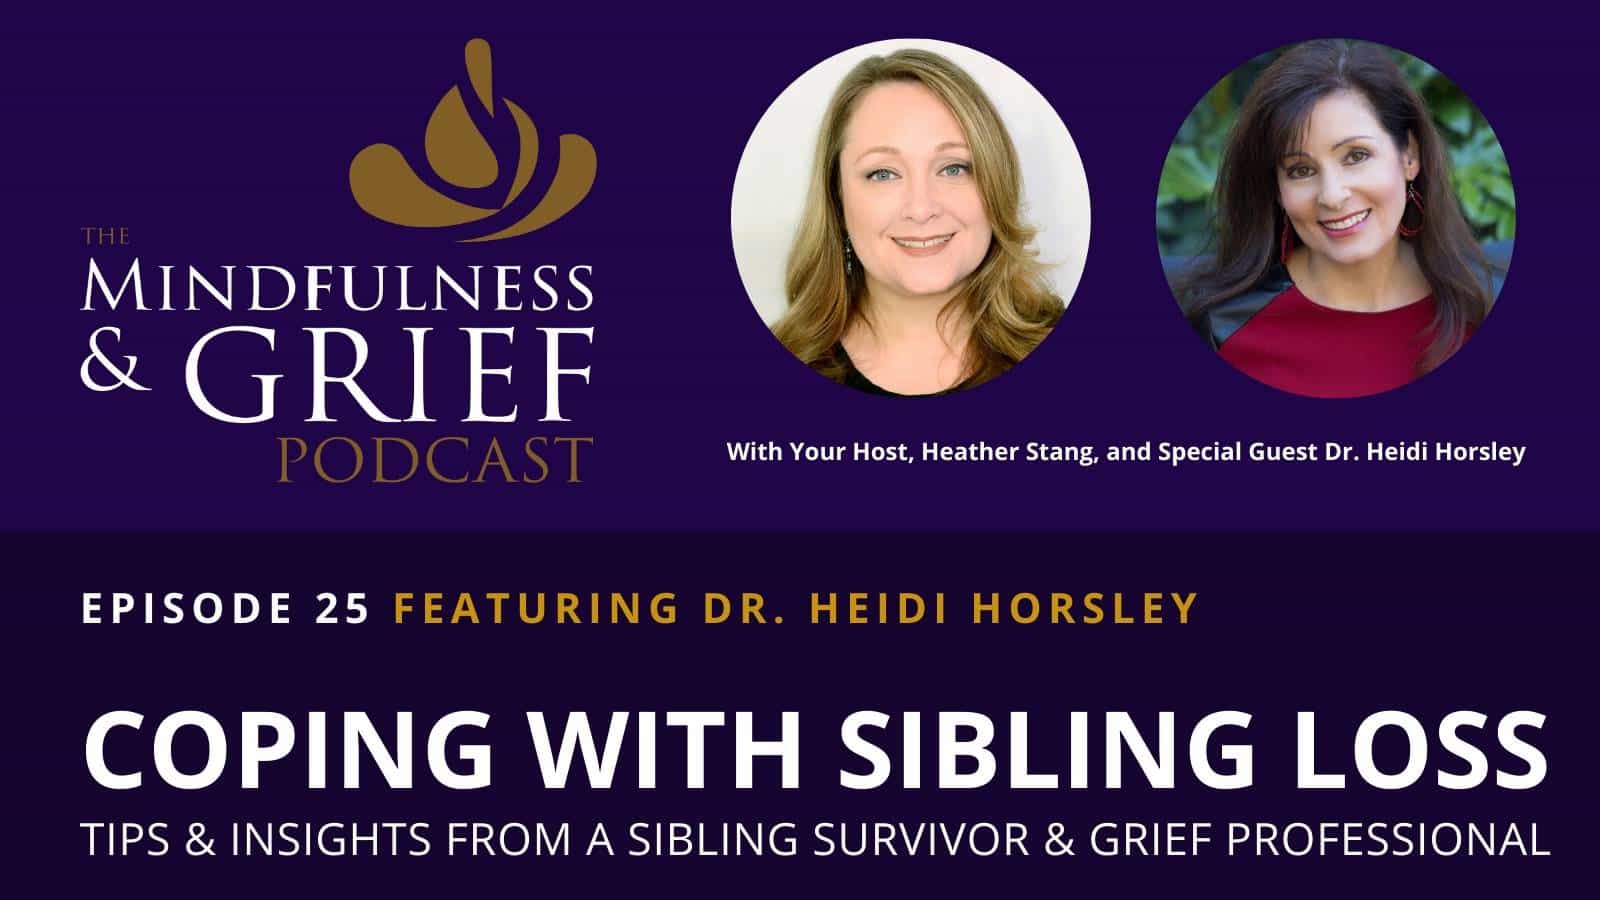 Coping with sibling loss tips and insights